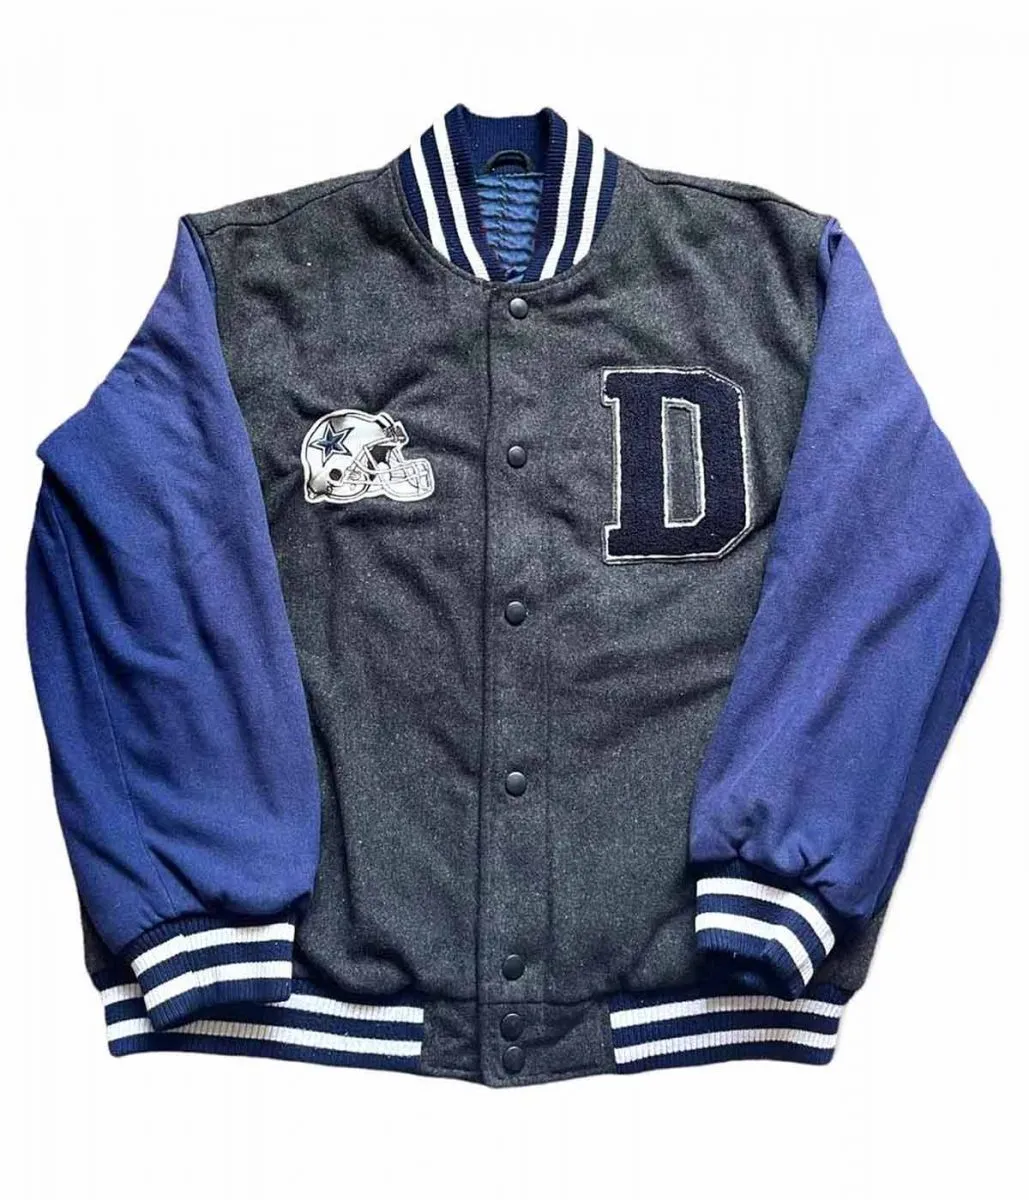 Dallas Cowboys Wool Gray and Blue Letterman Jacket